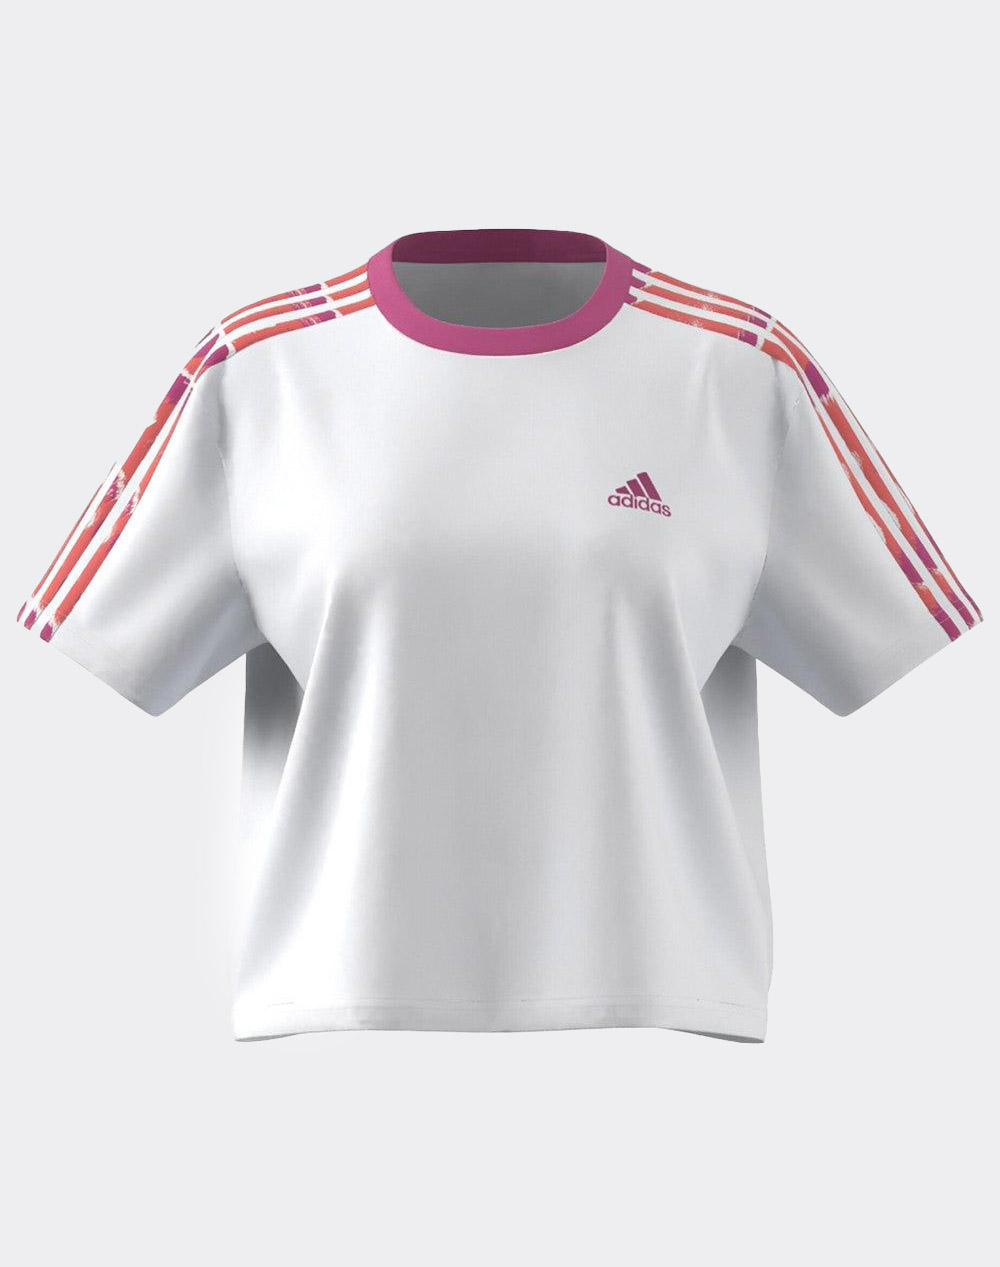 TOP White CR - W ADIDAS TOP 3S